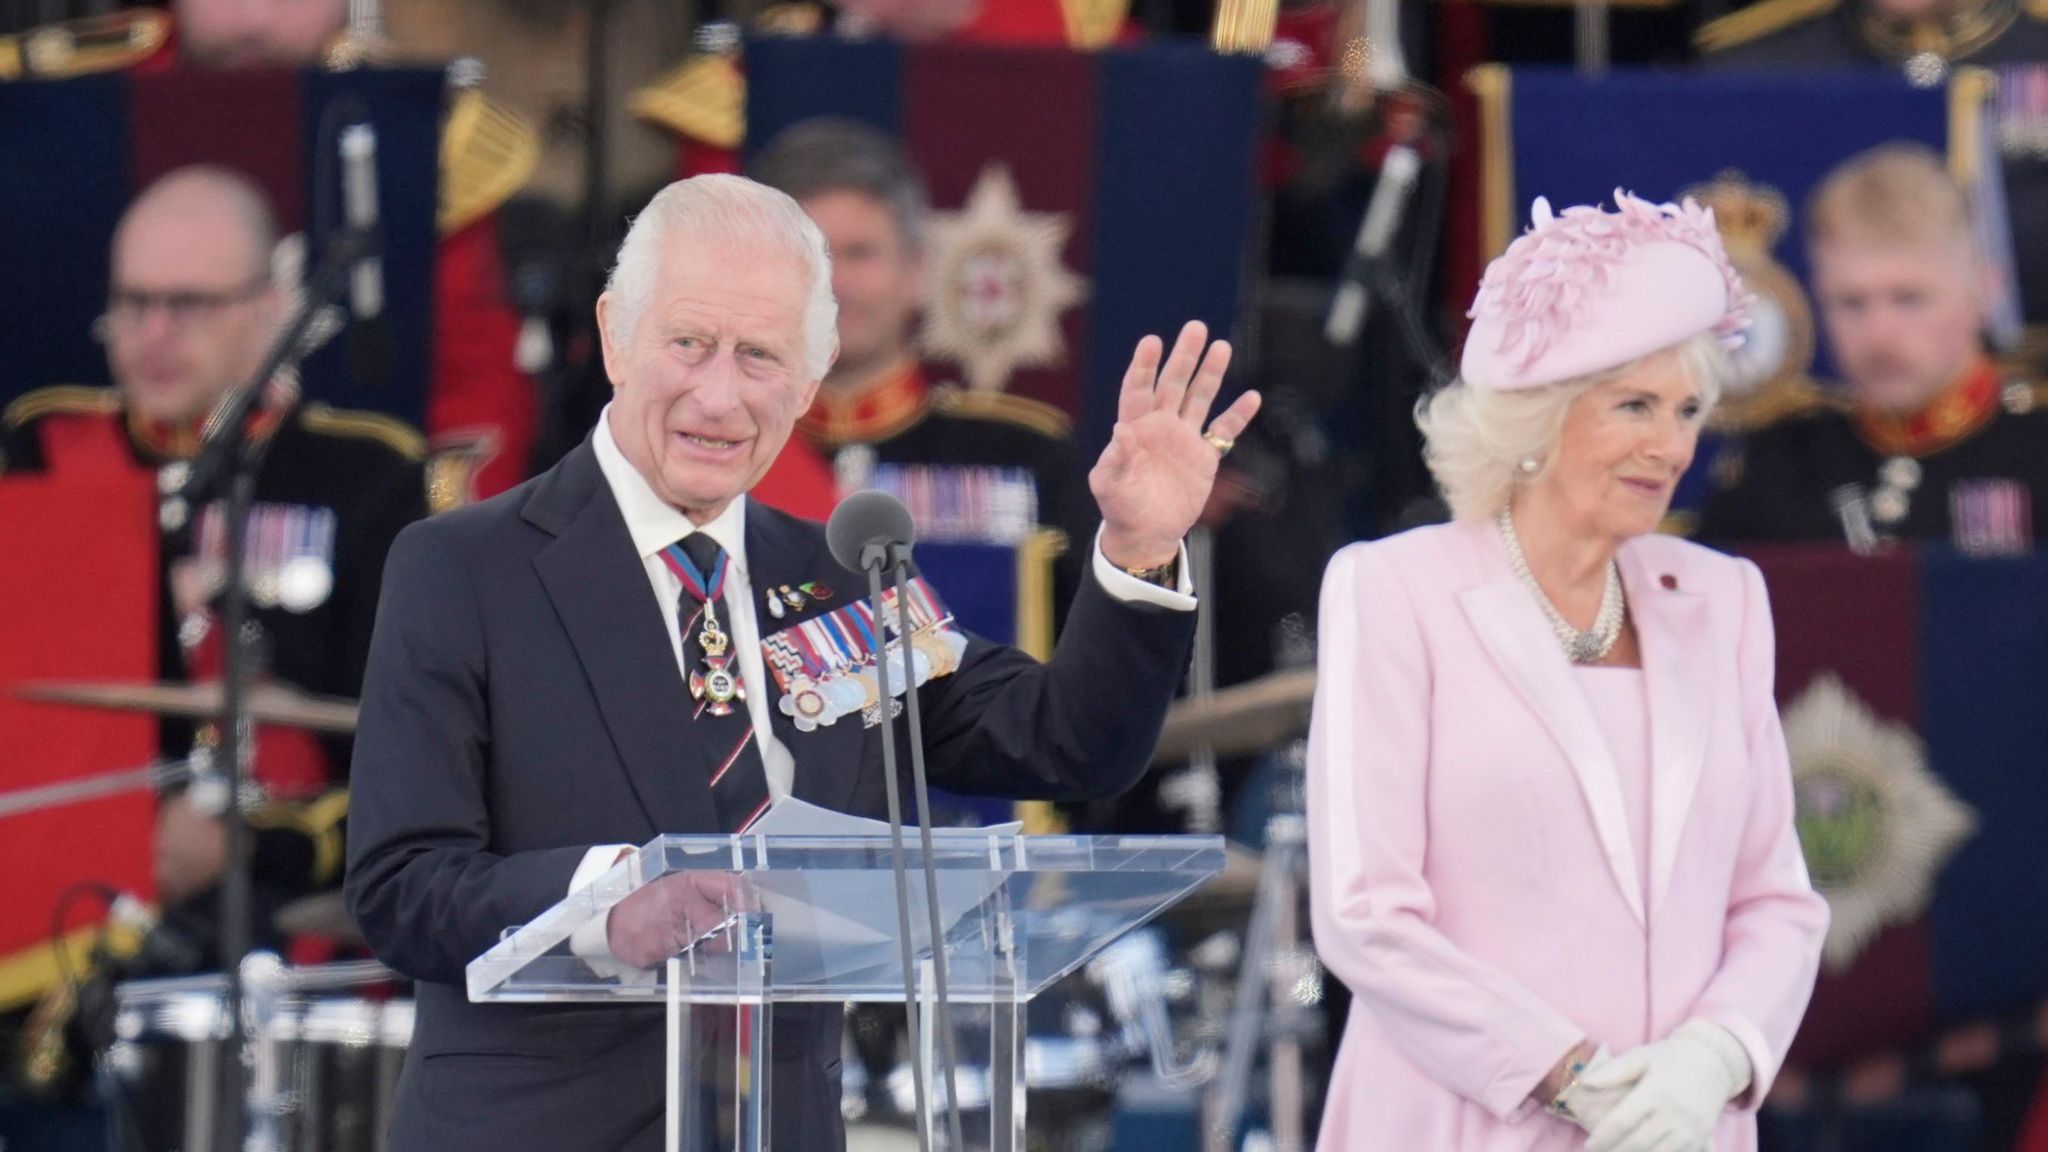 King Charles III and Queen Camilla on the stage at Southsea, the King can be seen waving as he is talking to the audience